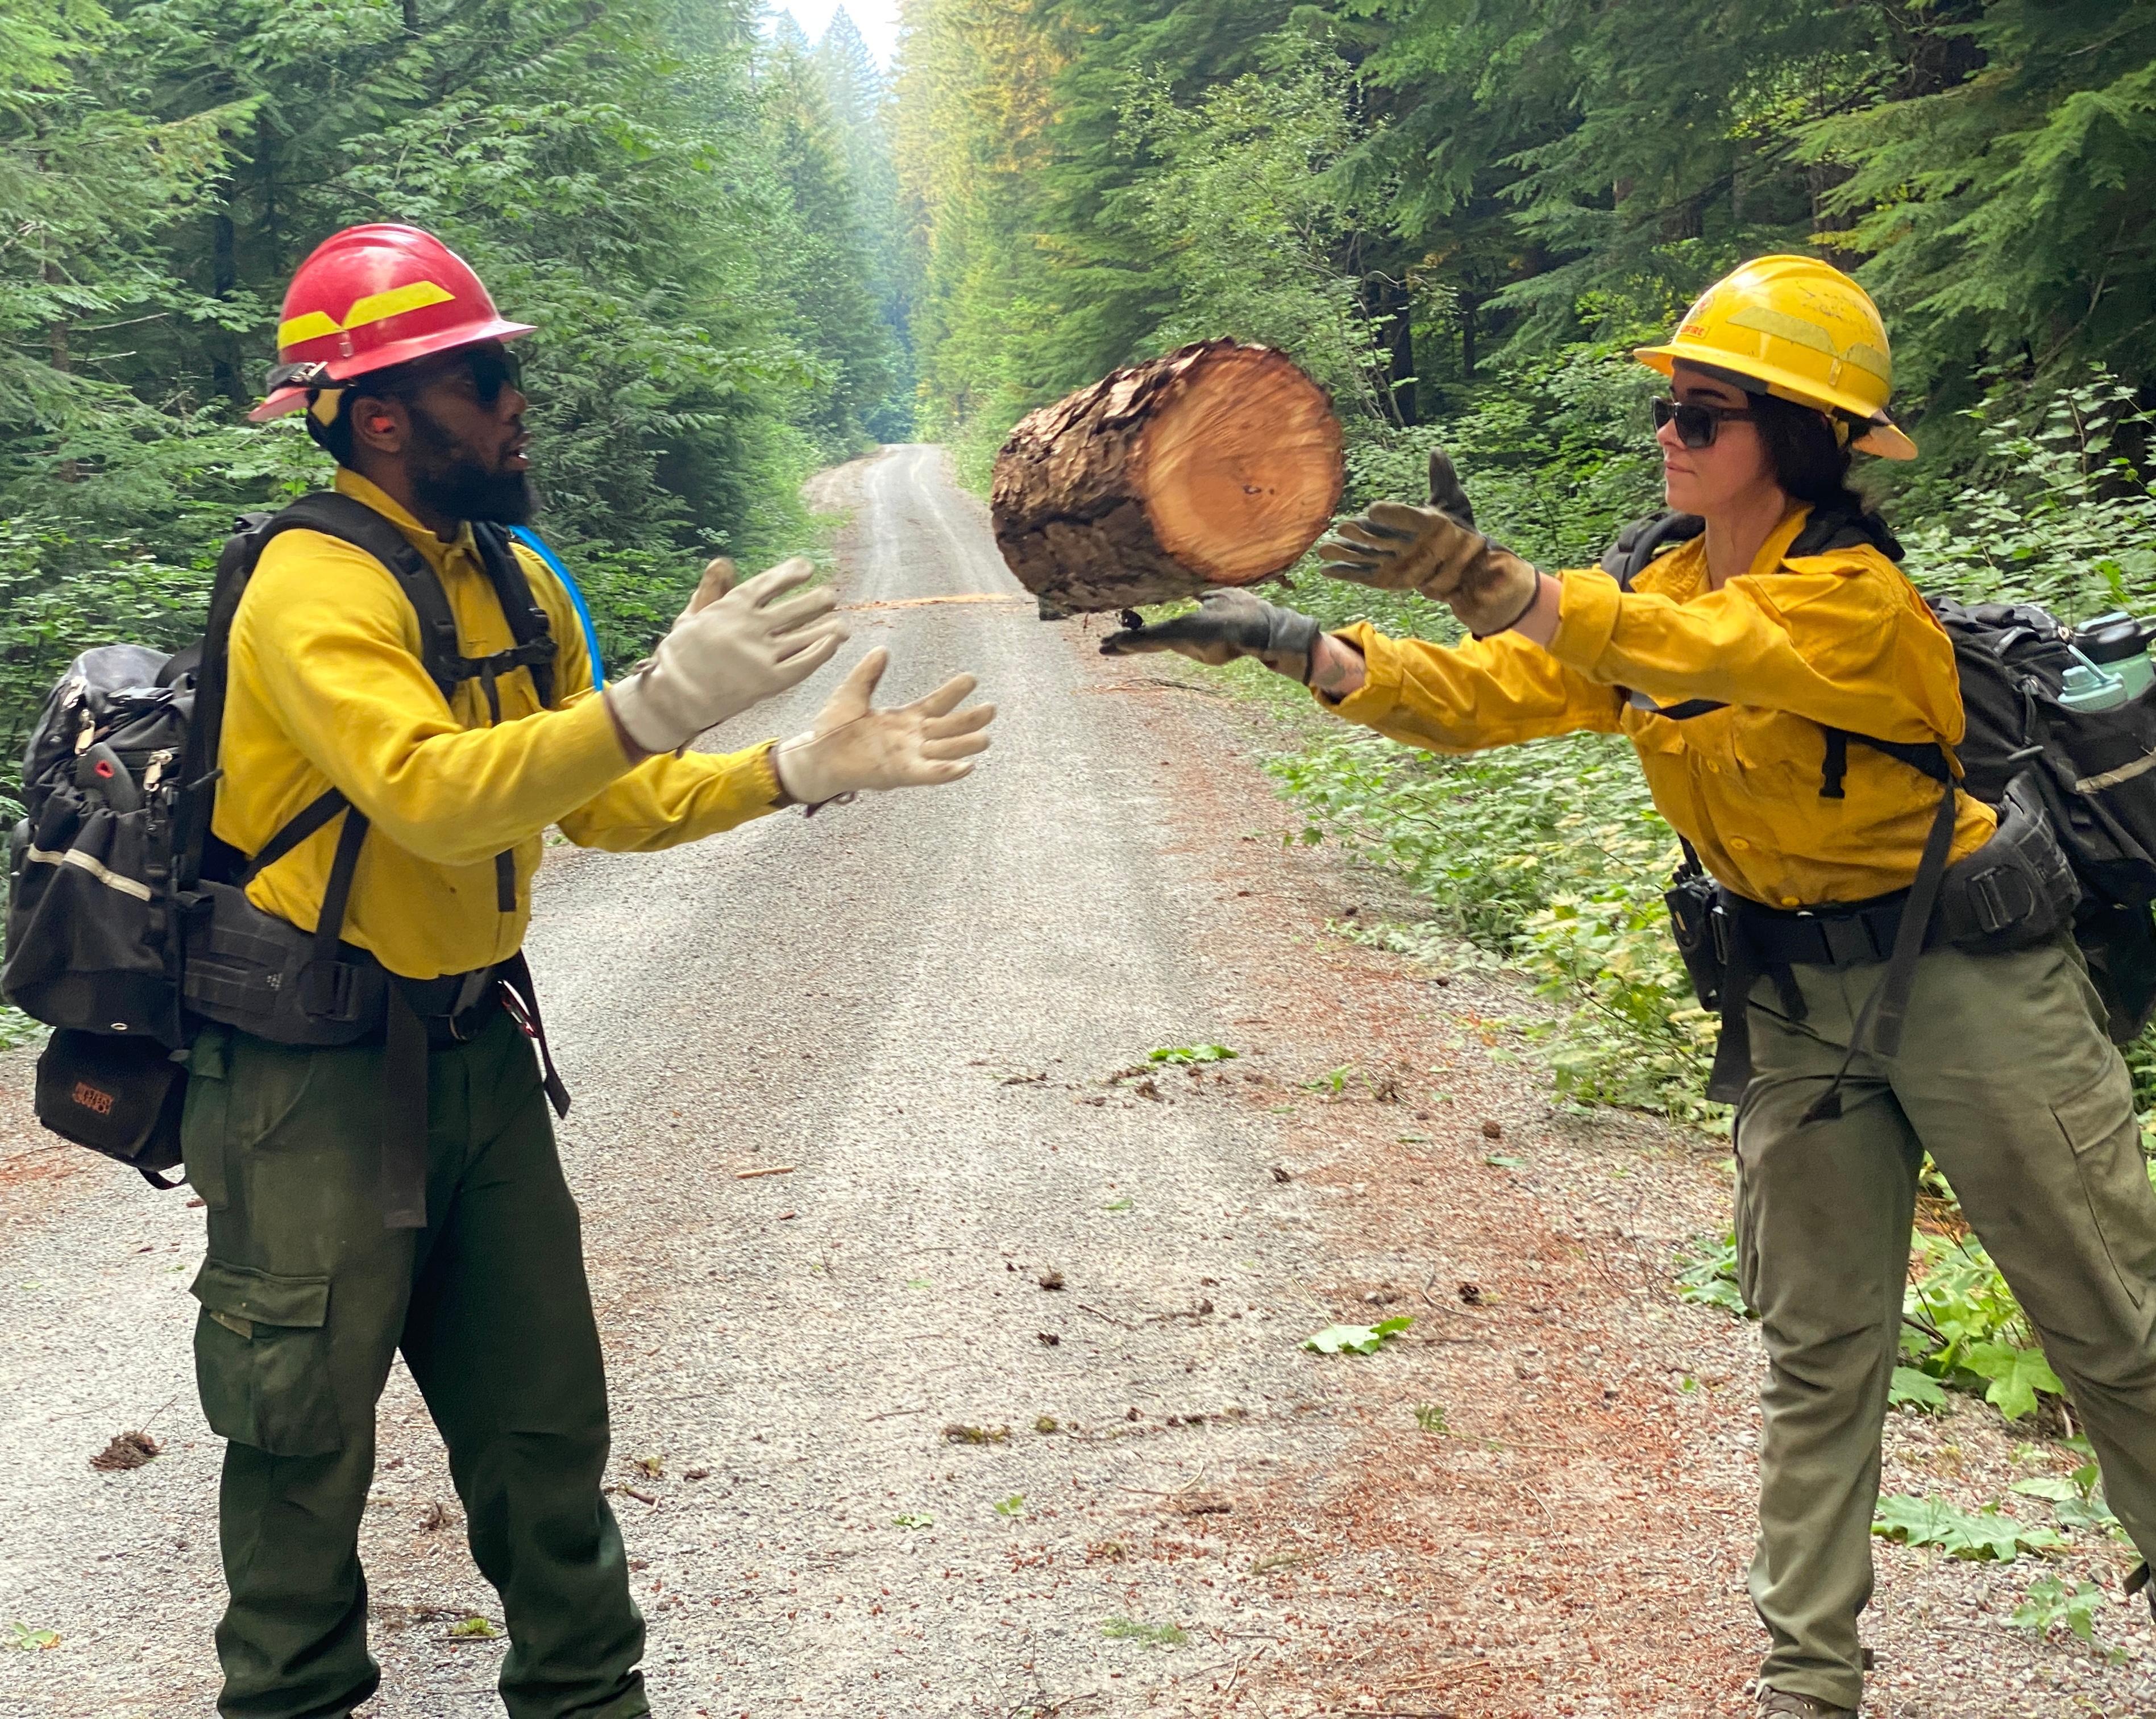 Two firefighters from an interagency crew from the Columbia River Gorge (BLM, USFS -GP -HOOD, and WA DNR) help chain out cut rounds as they clear Forest Road 2421 along Black Creek. The road is located south of fire and will potentially serve as a control